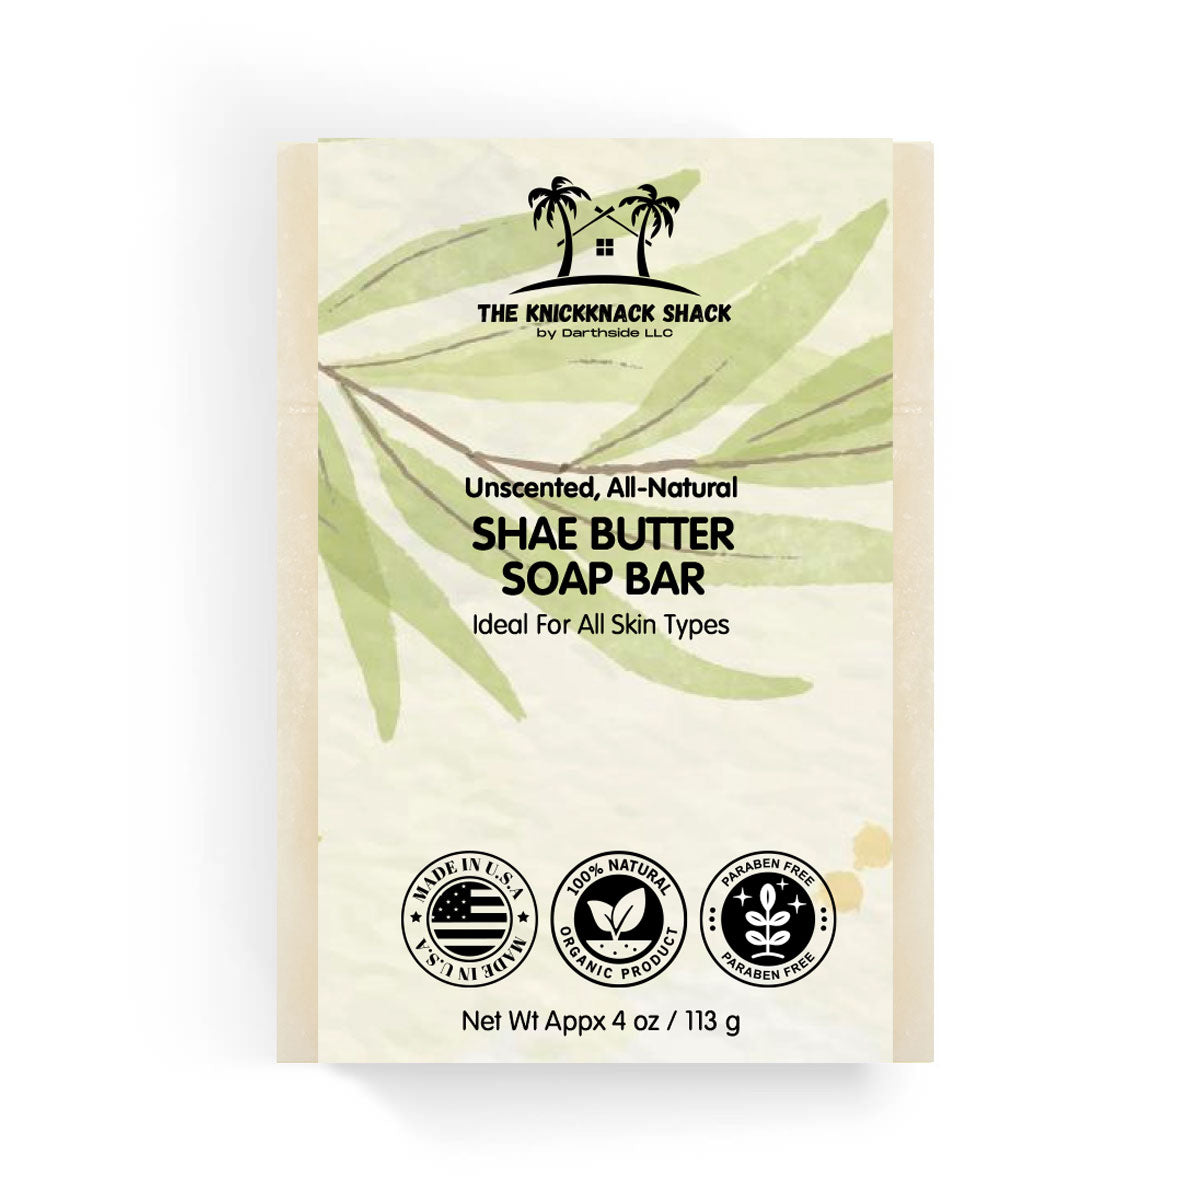 Unscented, All-Natural Shae Butter Soap Bar Ideal For All Skin Types